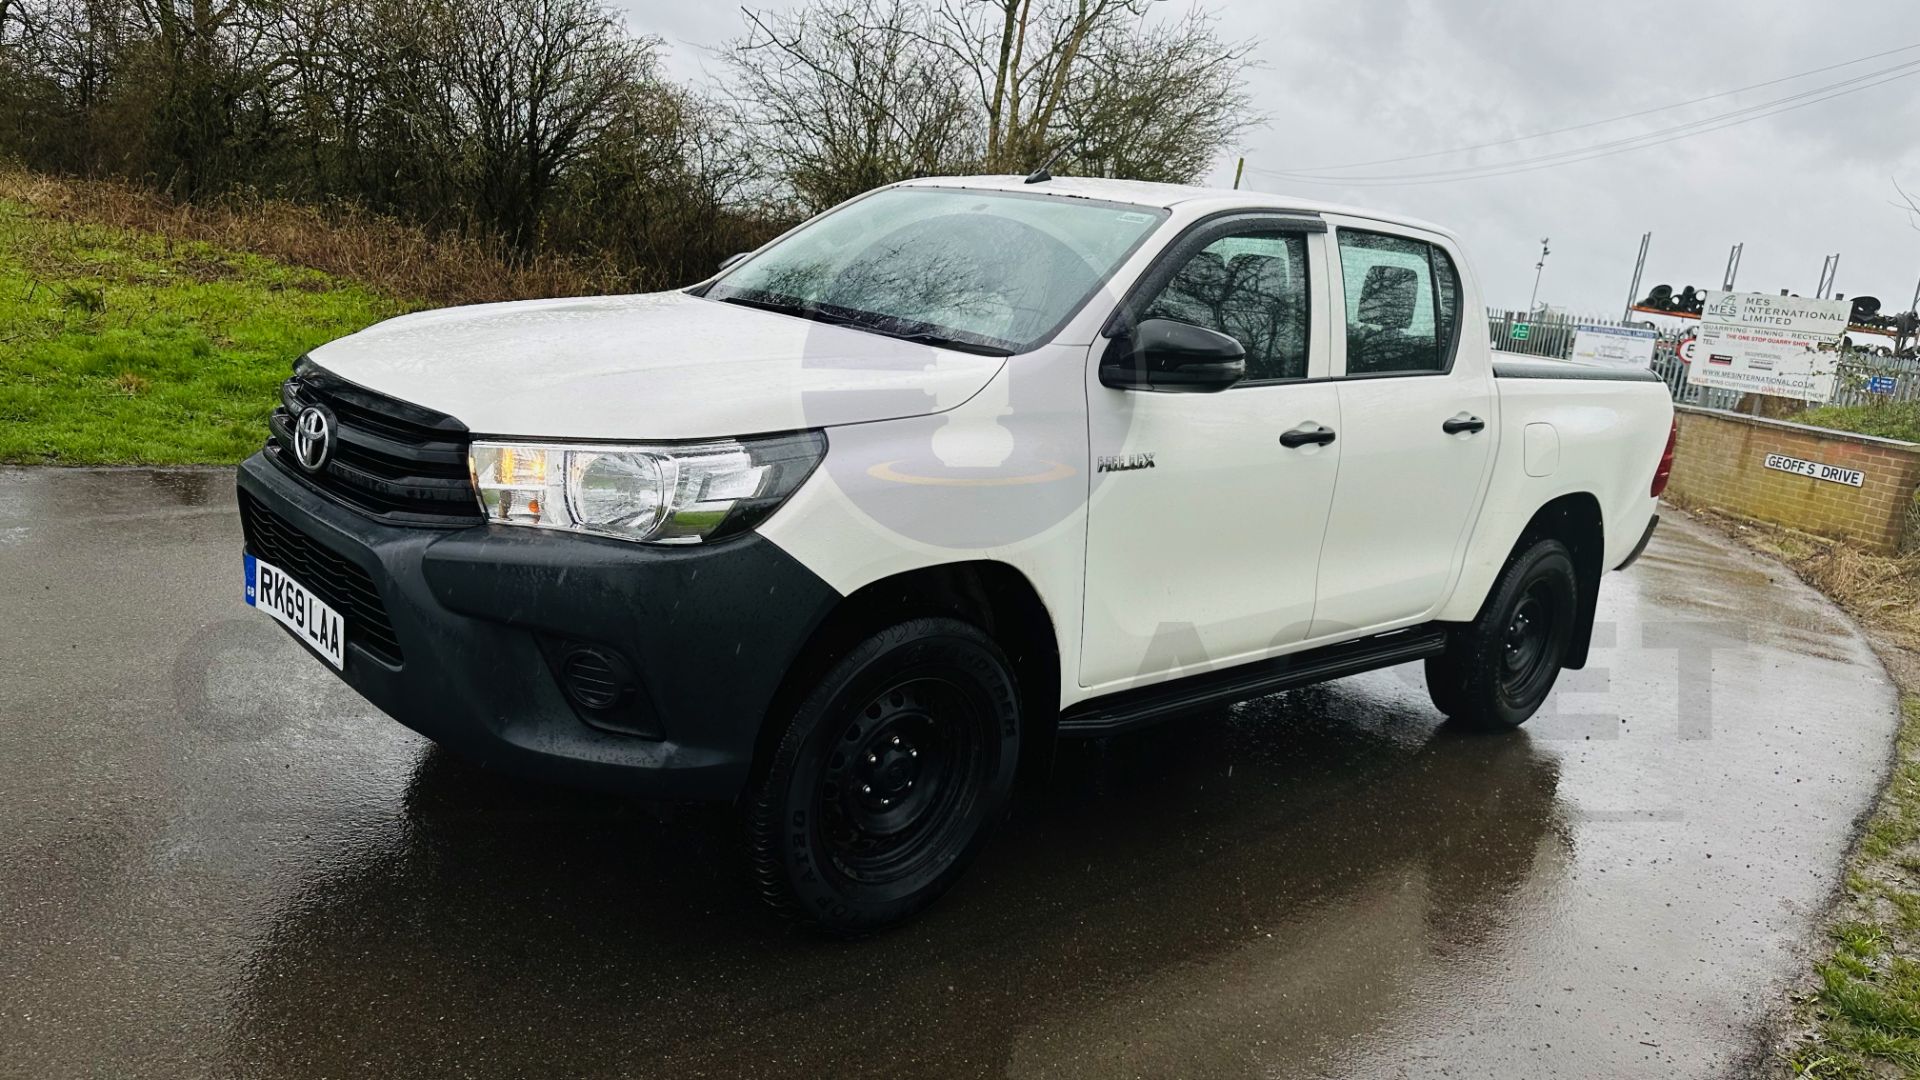 TOYOTA HILUX *DOUBLE CAB PICK-UP* (2020 - EURO 6) 2.4 D-4D - AUTO STOP/START *AIR CON* (1 OWNER) - Image 10 of 48